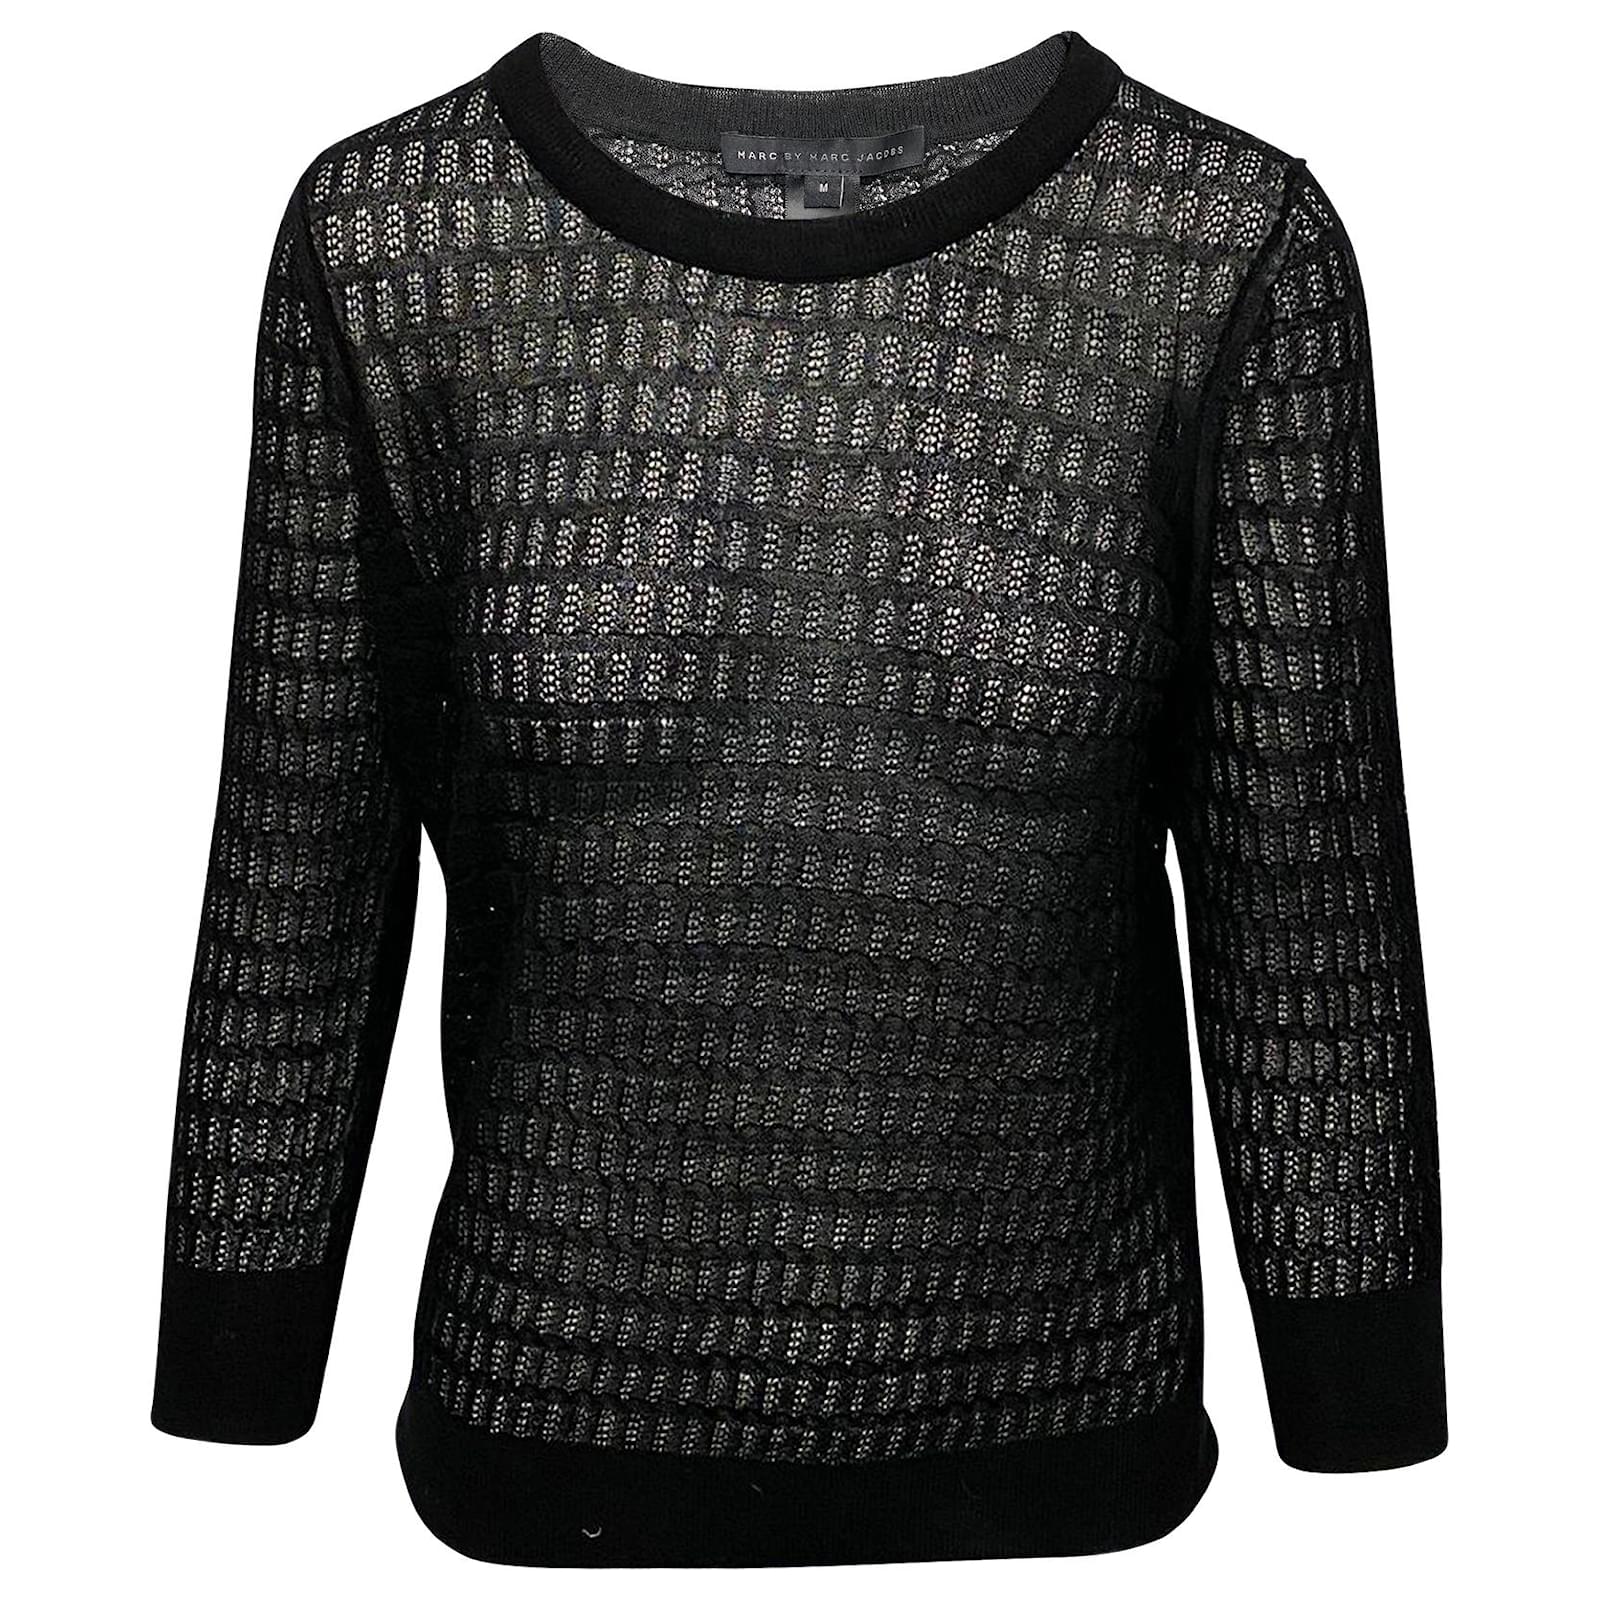 Marc by Marc Jacobs Perforated Knit Top in Black Cotton